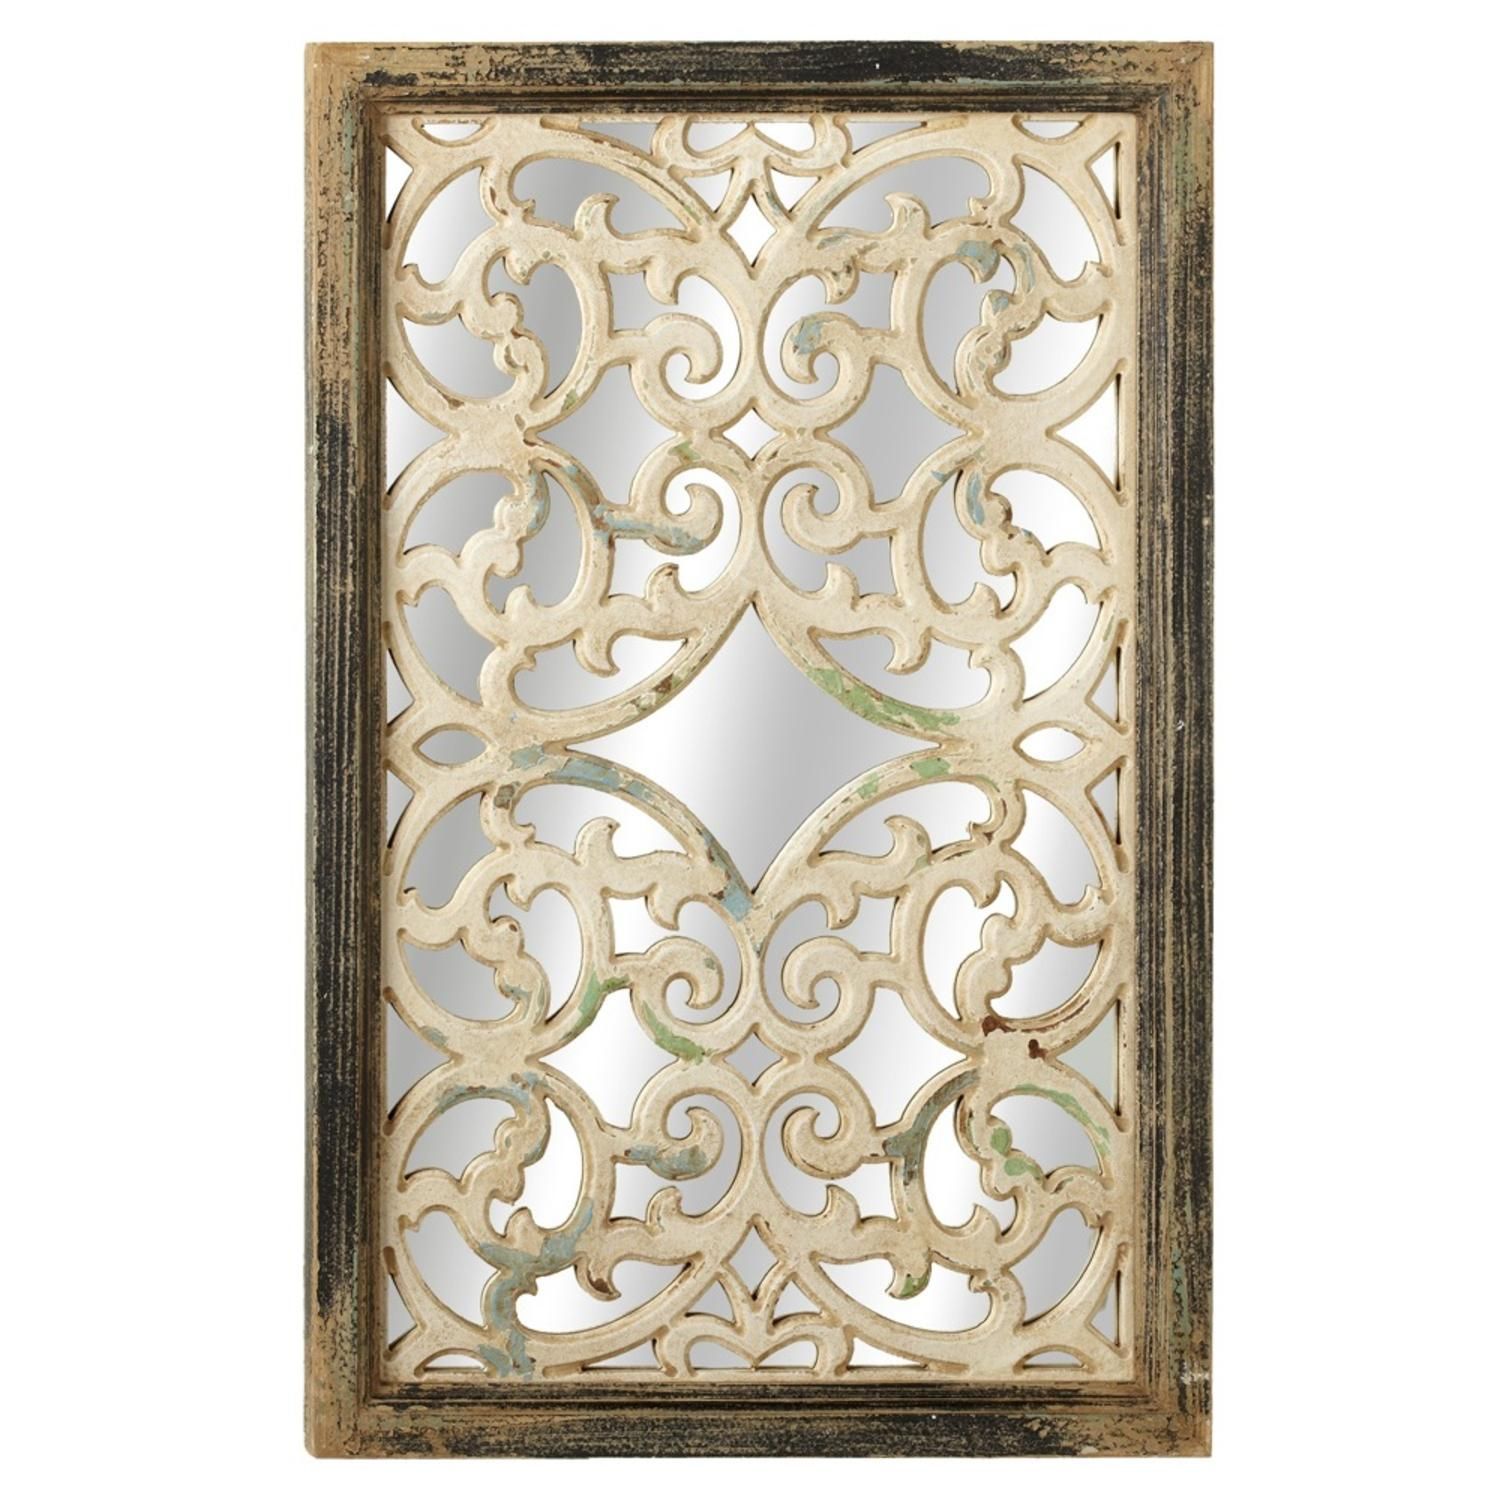 34" Black And White Scroll Inlaid Distressed Wooden Framed Wall Mirror Intended For Black Wood Wall Mirrors (View 4 of 15)